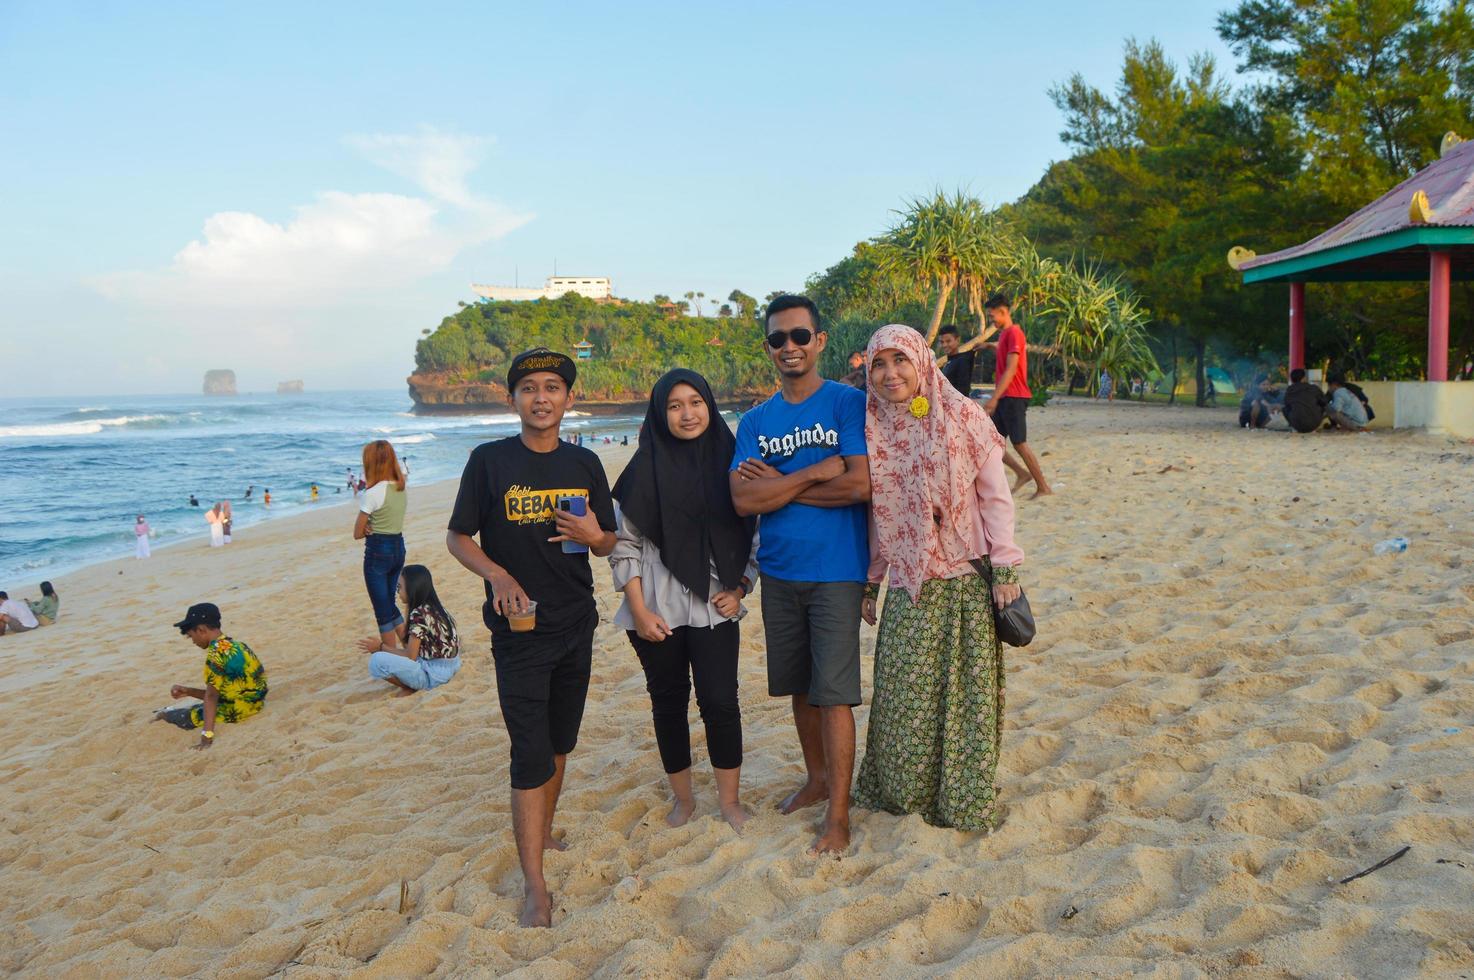 malang, indonesia, 2022 - beach atmosphere with people meeting photos during the Eid al-Fitr holiday after the 2022 pandemic on the coast of Goa China, Malang